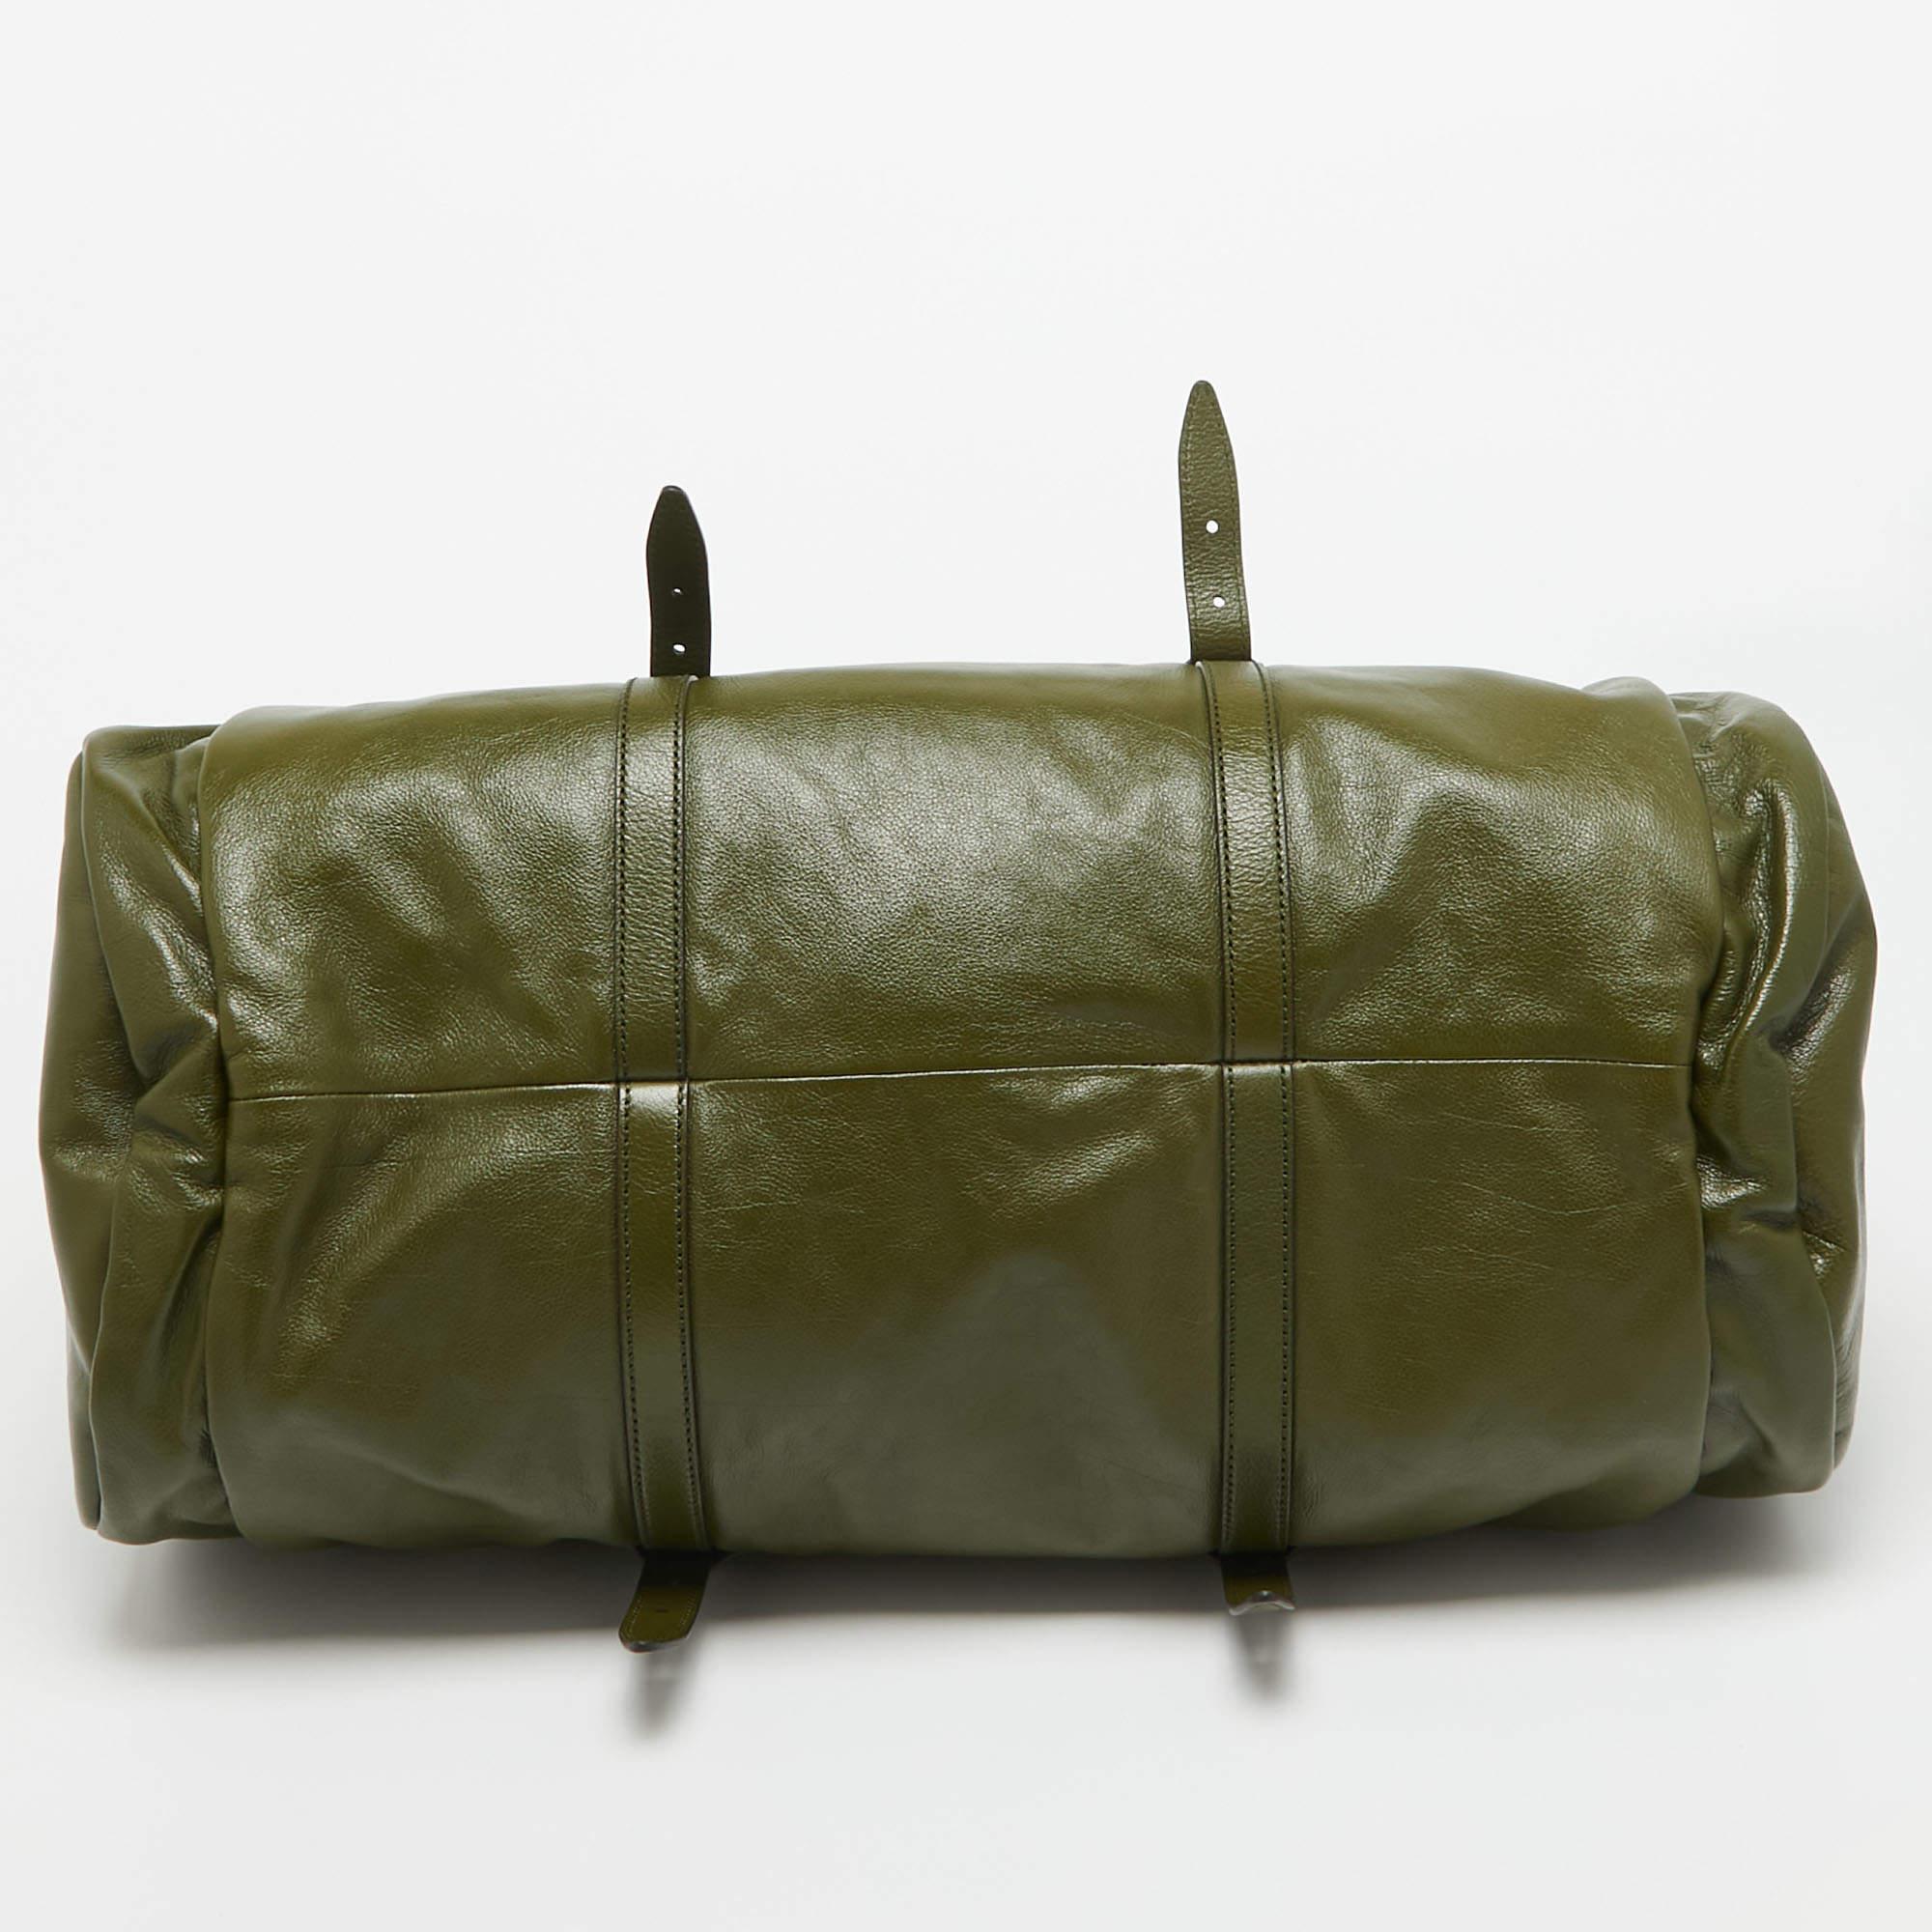 Gucci Green Leather Large Tonal Double G Duffle Bag For Sale 4